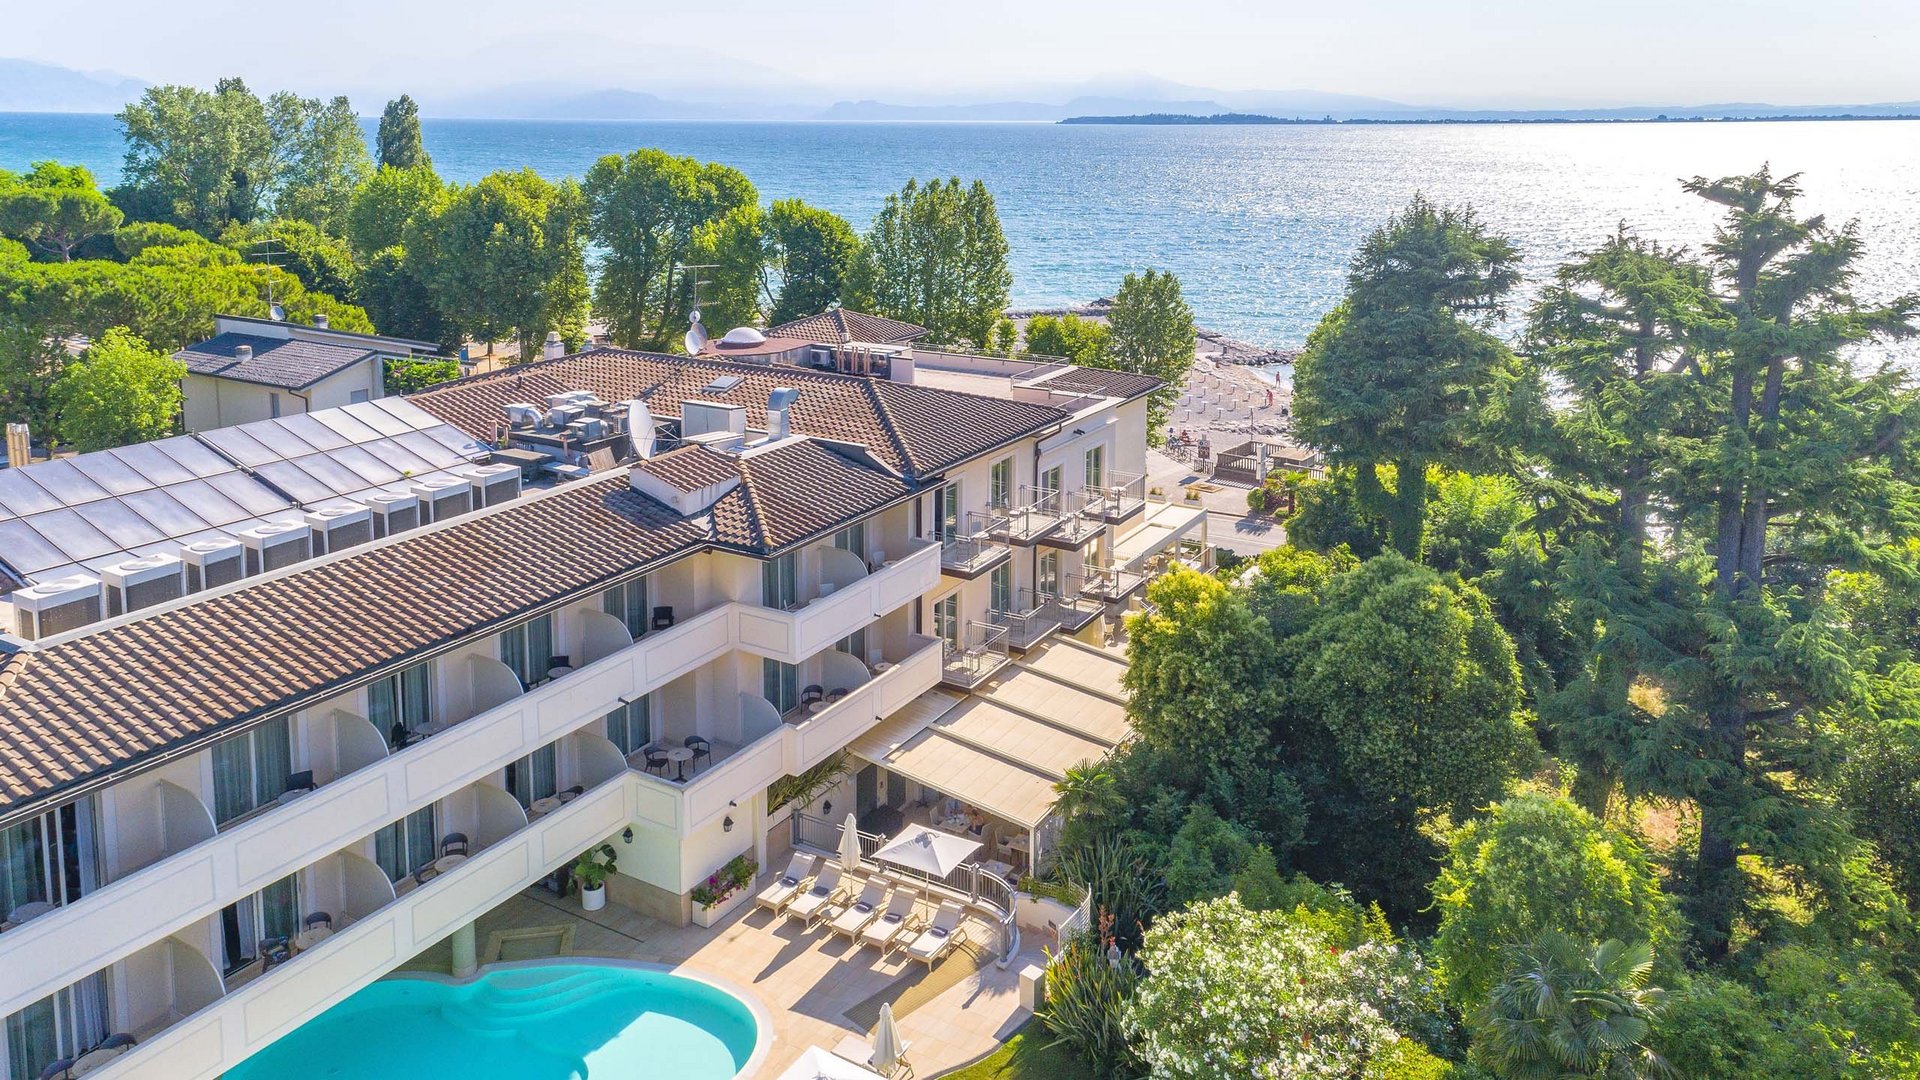 Hotel with a view of Lake Garda: an enviable location